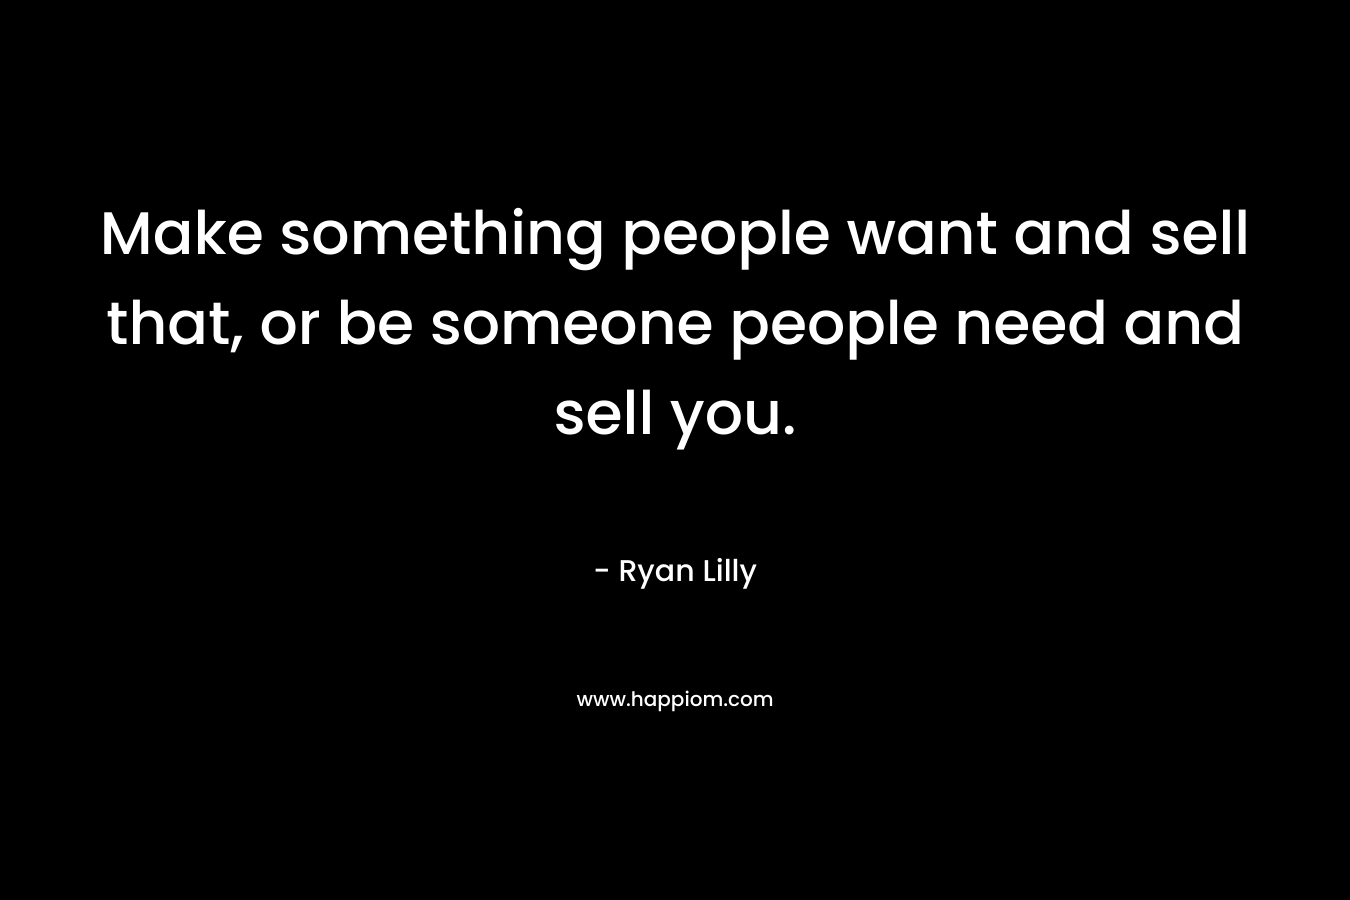 Make something people want and sell that, or be someone people need and sell you.